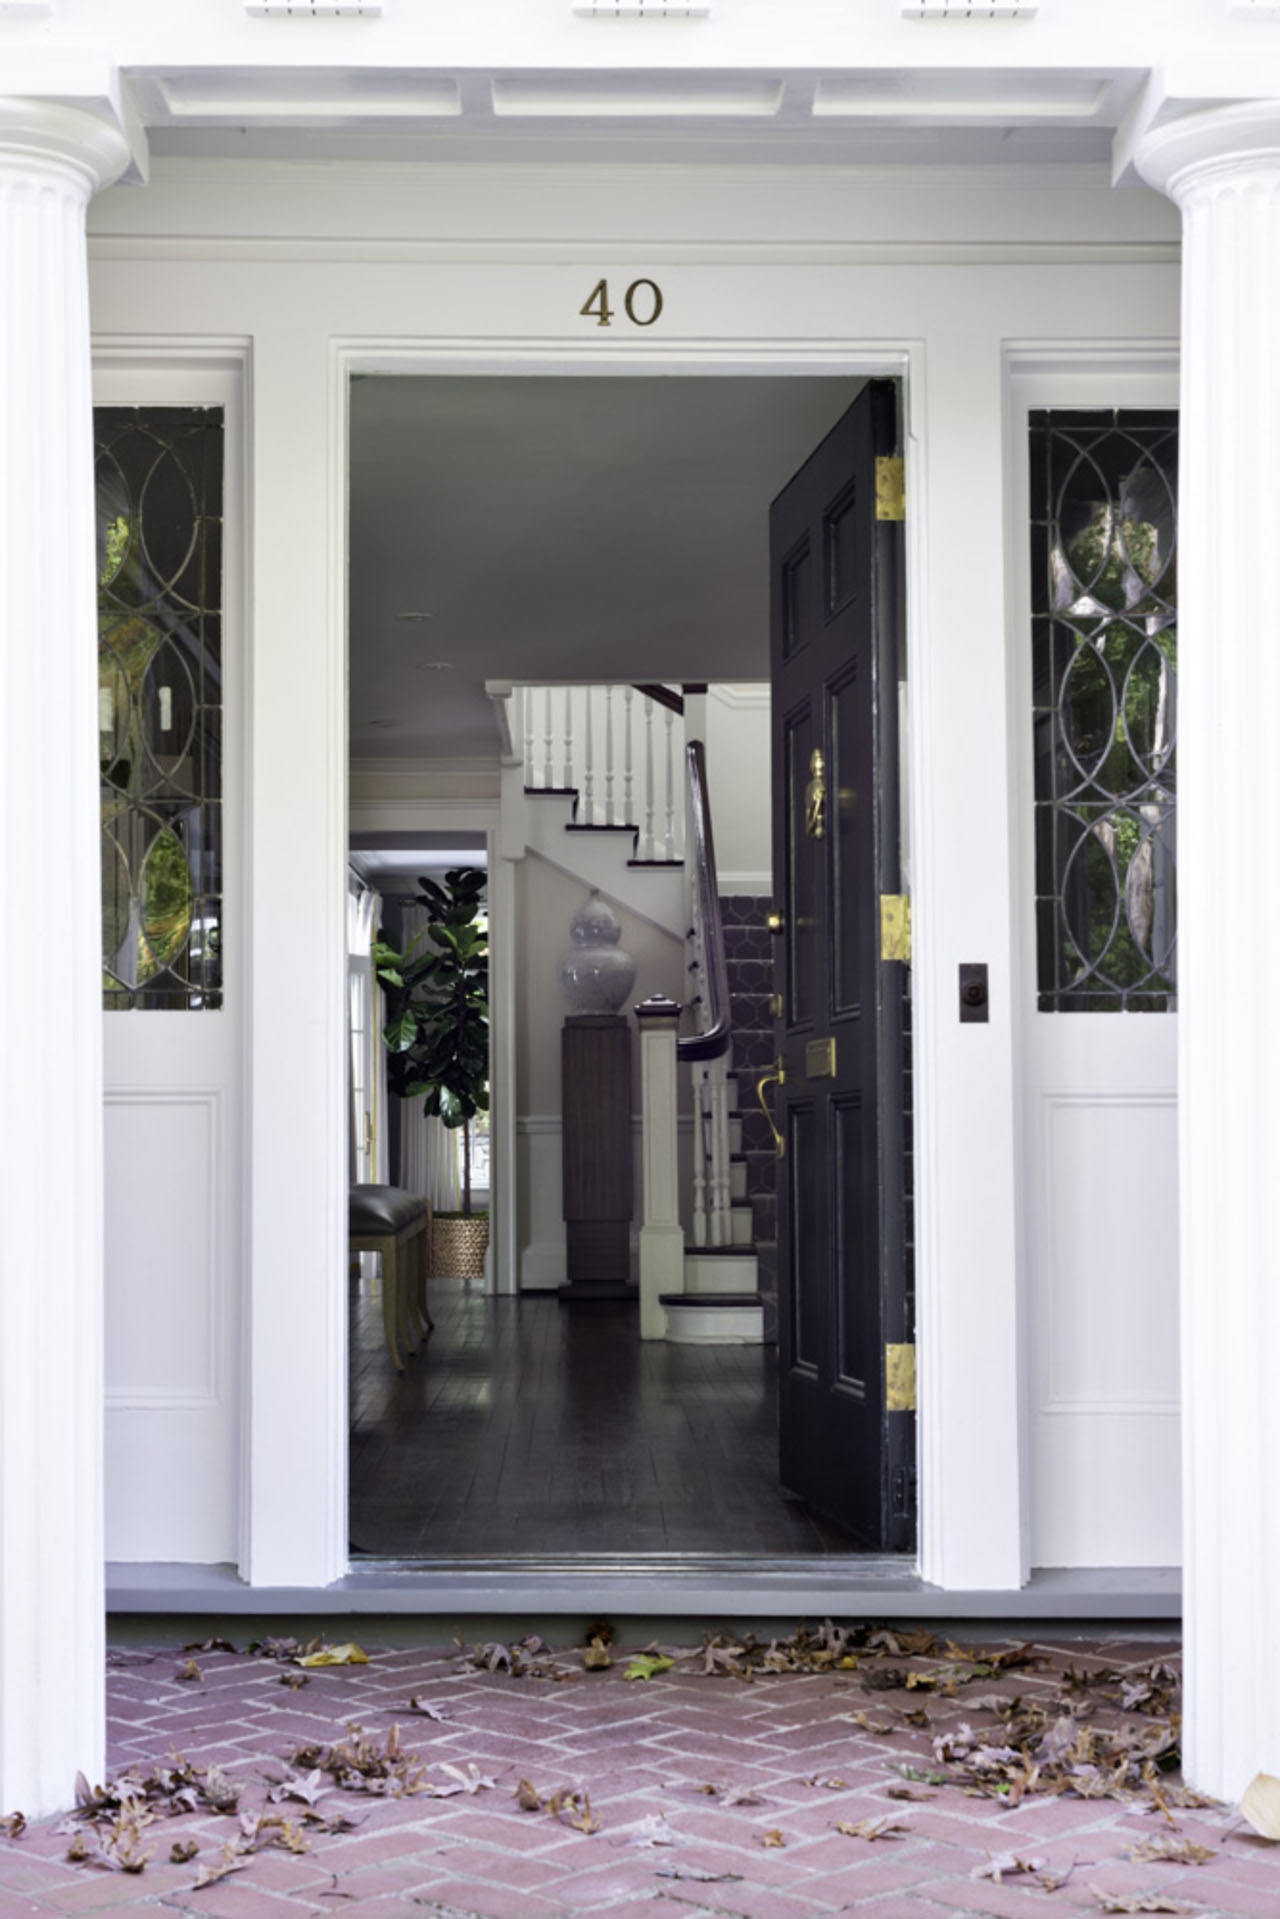 Catching Avon By Eye Catching Avon Road Residence By BHDM Entrance Displaying Grey Painted Door Panel With Brass Hardware Dream Homes Classic Living Room Style For The Stylish Home Appearance